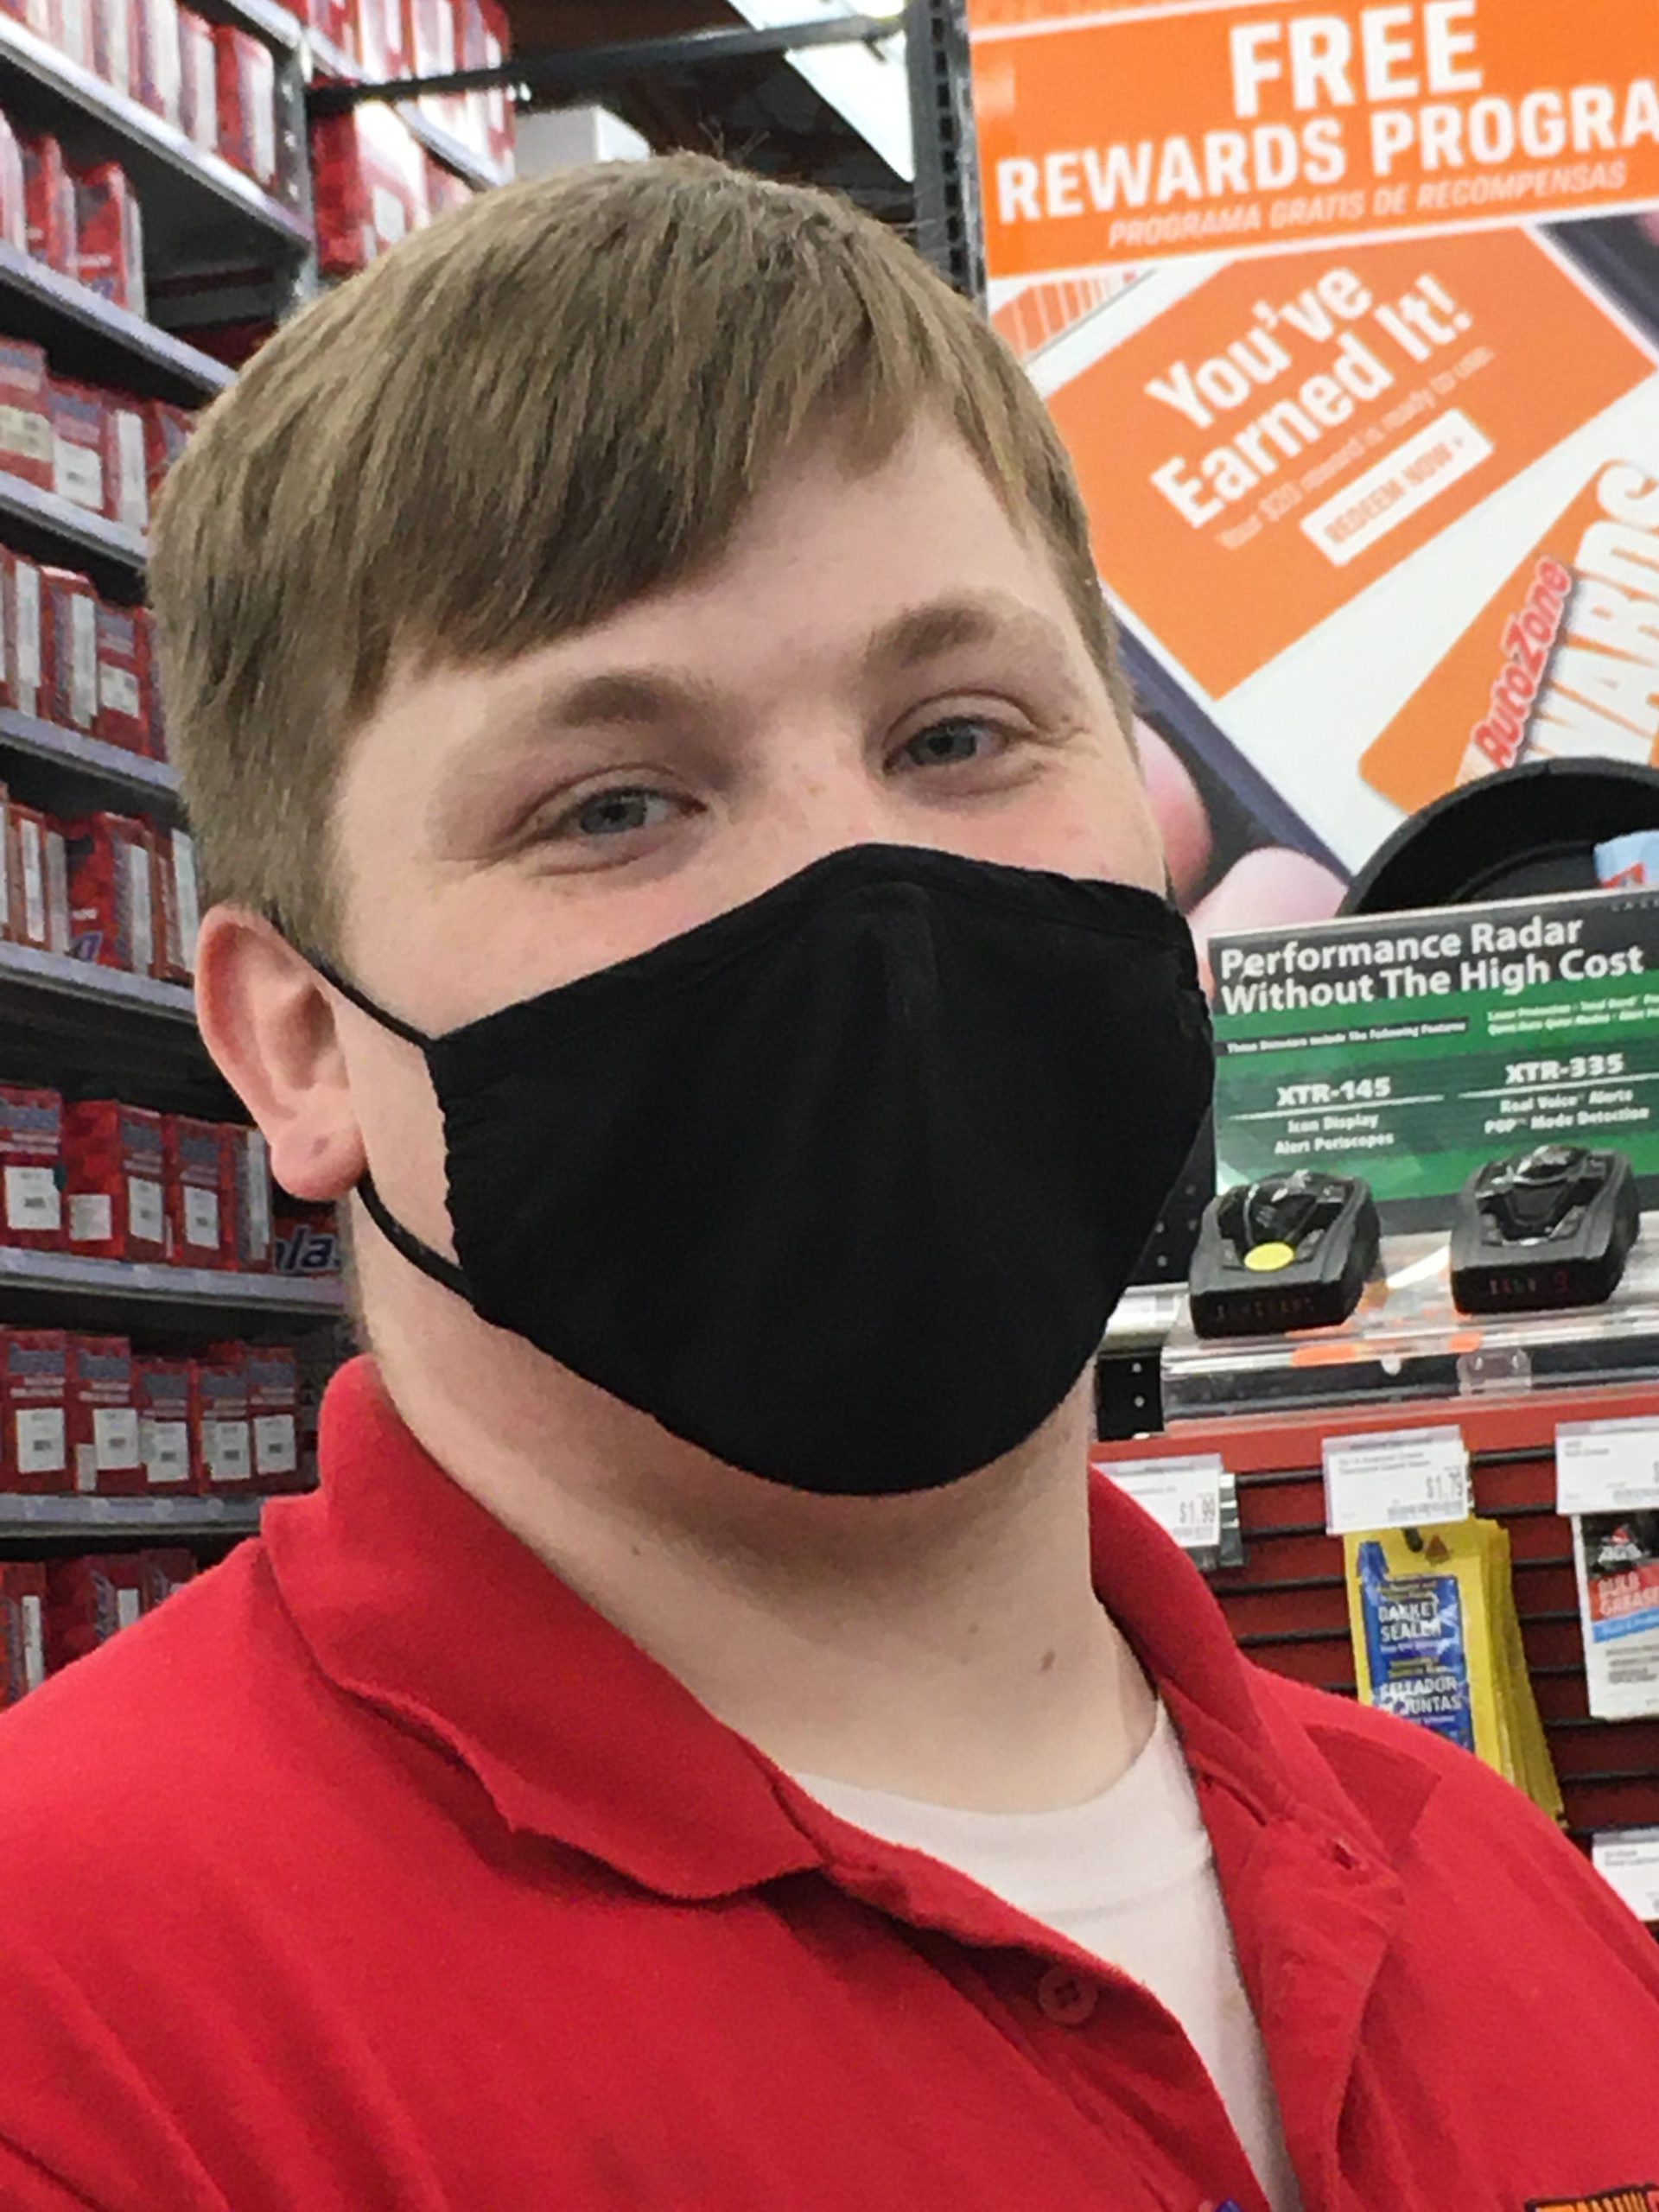 Image: Man with short brown hair, black mask, and red shirt looks into the camera. Photo is from chest up.